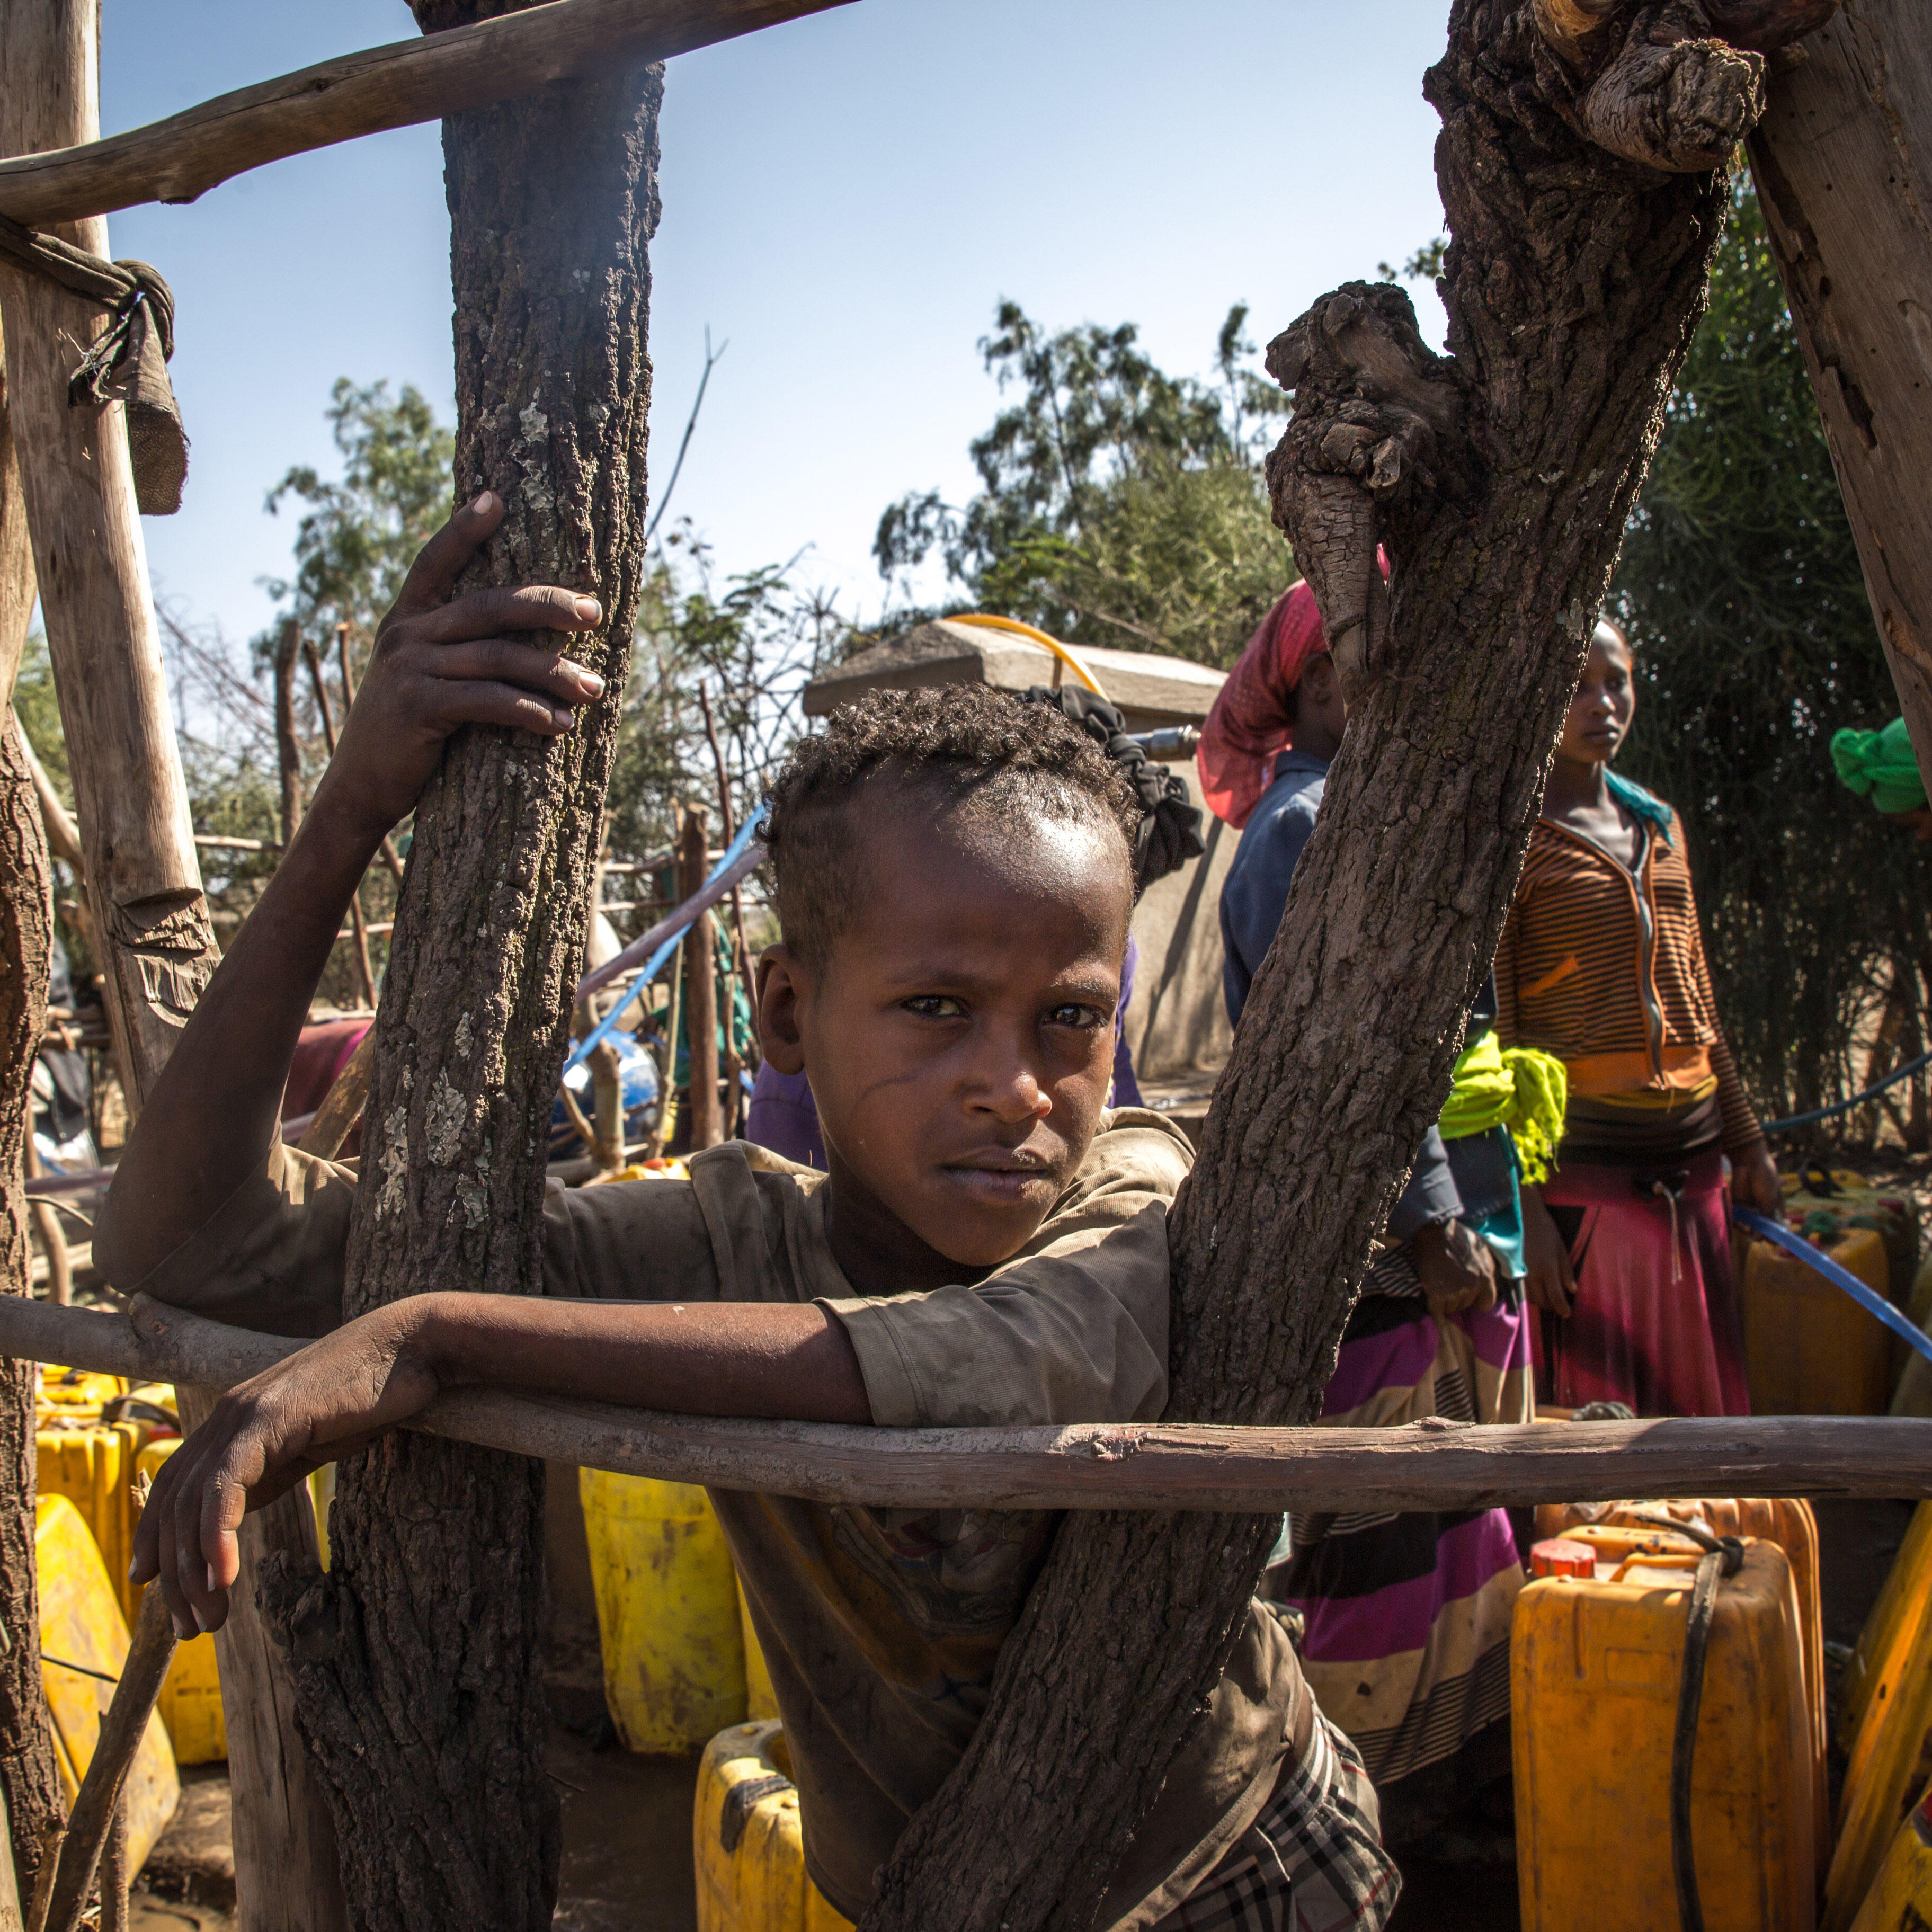 A boy leans against a fence made of branches amid people gathering water in jerrycans from an IRC-installed water system in Ethiopia.